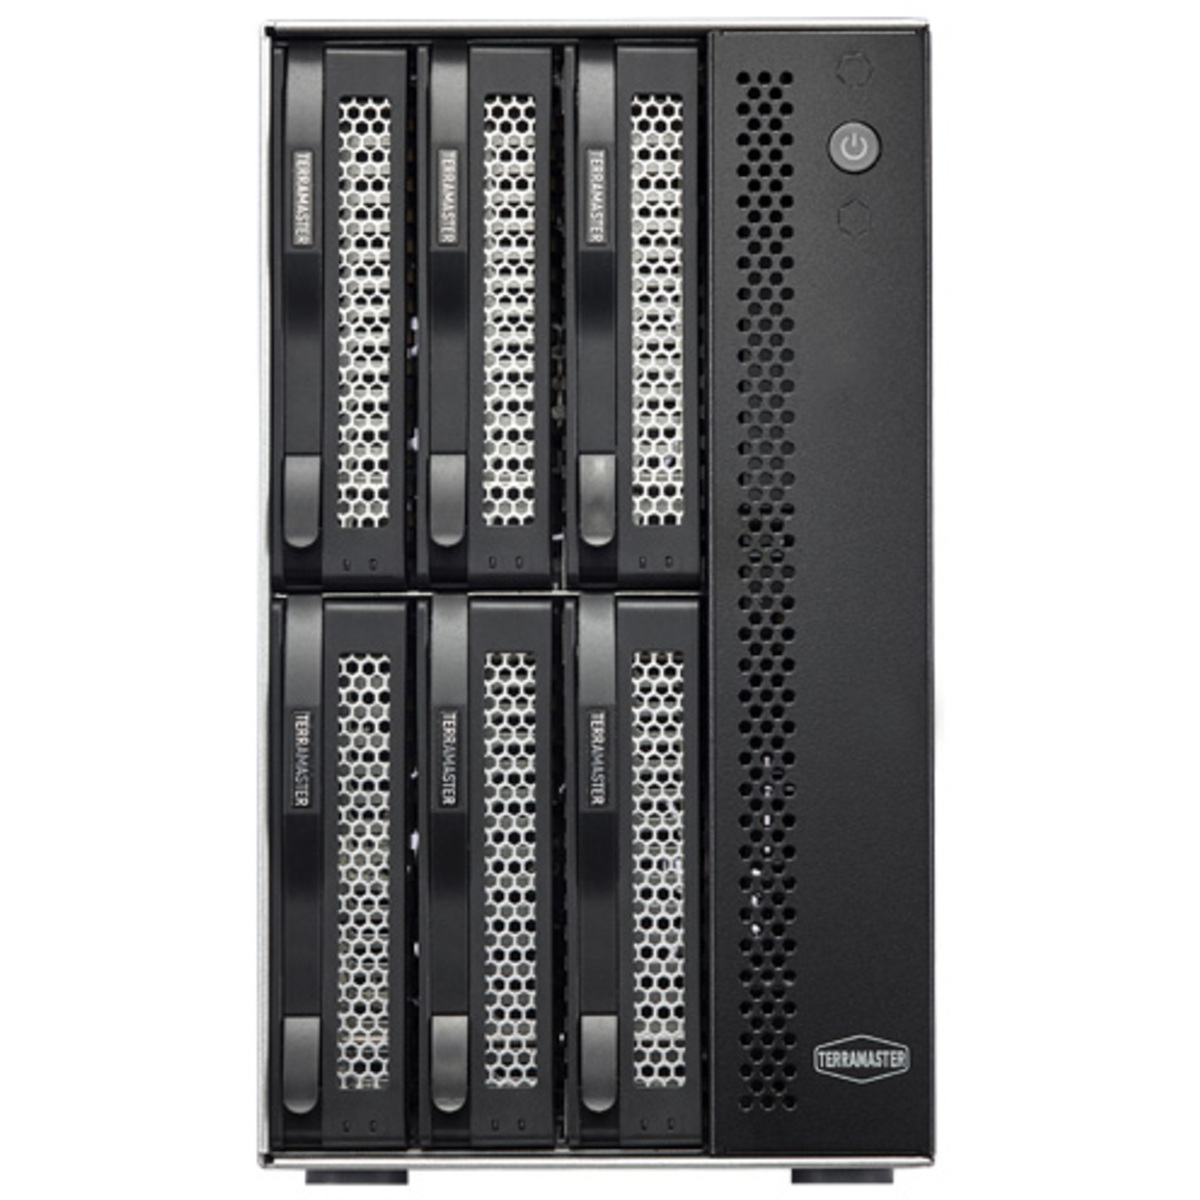 buy $2970 TerraMaster T6-423 120tb Desktop NAS - Network Attached Storage Device 6x20000gb Seagate EXOS X20 ST20000NM007D 3.5 7200rpm SATA 6Gb/s HDD ENTERPRISE Class Drives Installed - Burn-In Tested - FREE RAM UPGRADE - nas headquarters buy network attached storage server device das new raid-5 free shipping usa T6-423